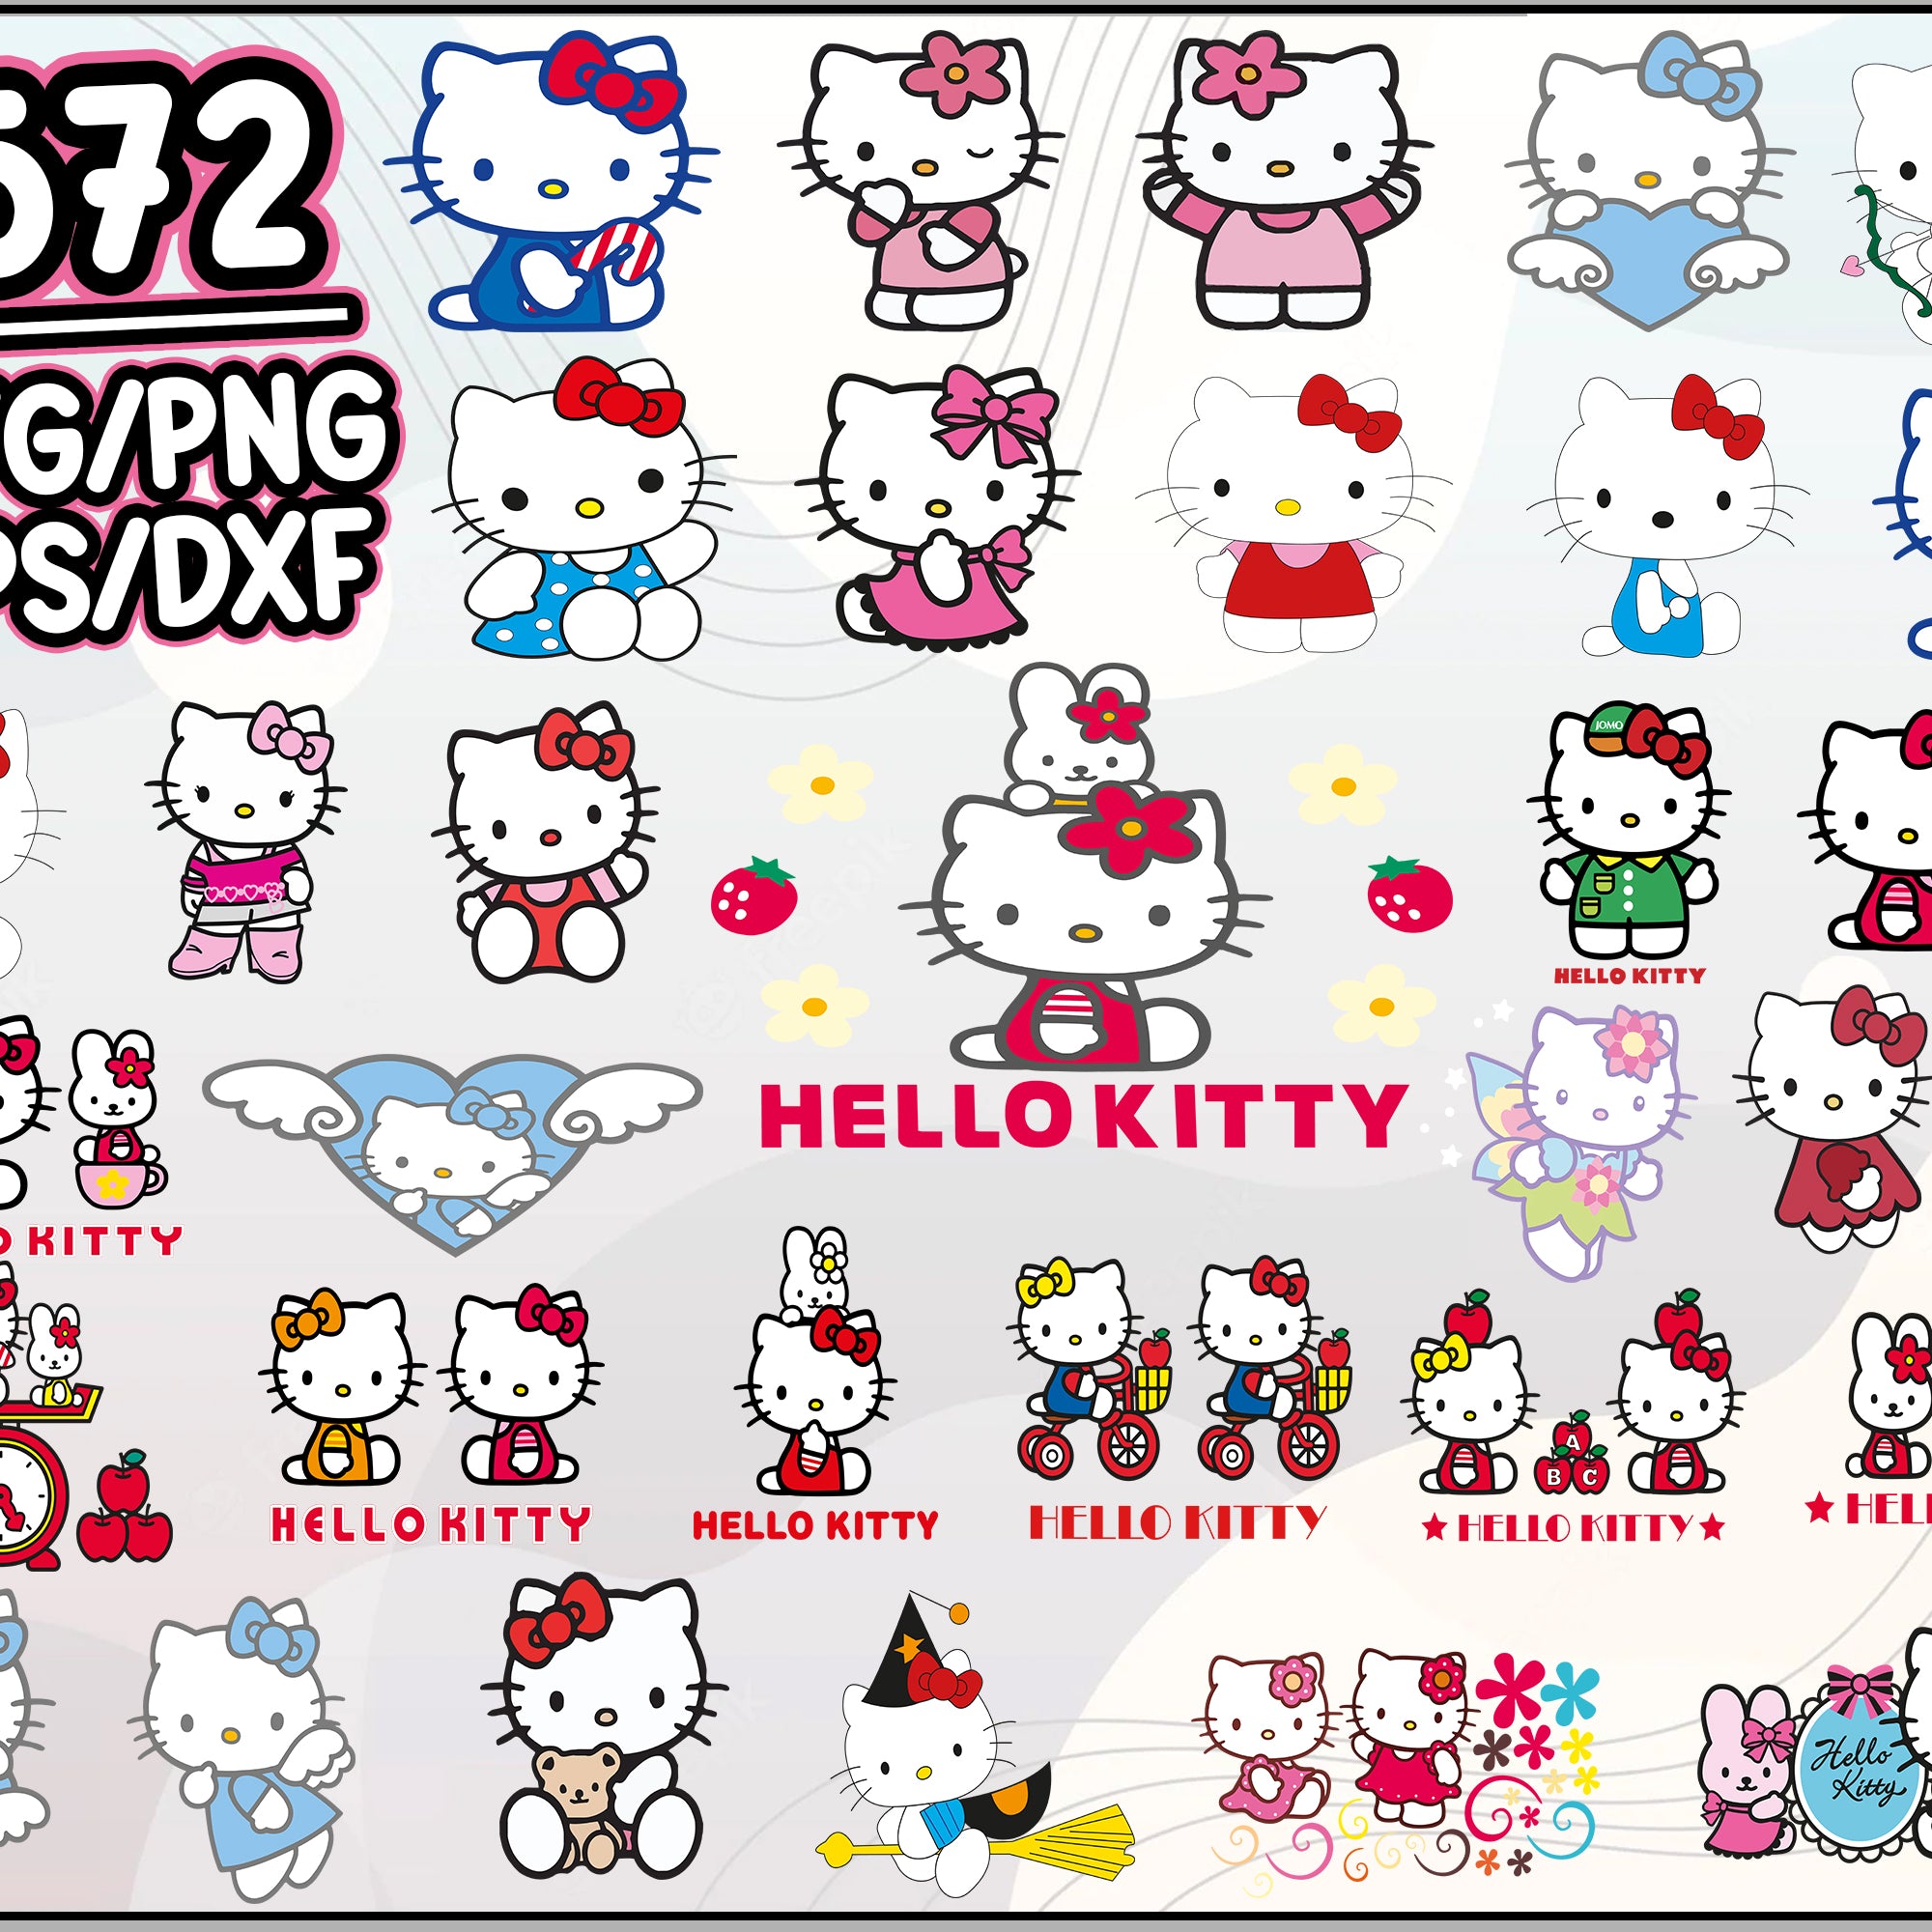 572+ Hello Kitty Svg Bundle, Hello Kitty Svg, Hello Kitty for cricut, Hello Kitty cut file, Hello Kitty png, Hello Kitty dxf, Cartoon svg, png, dxf, eps digital file